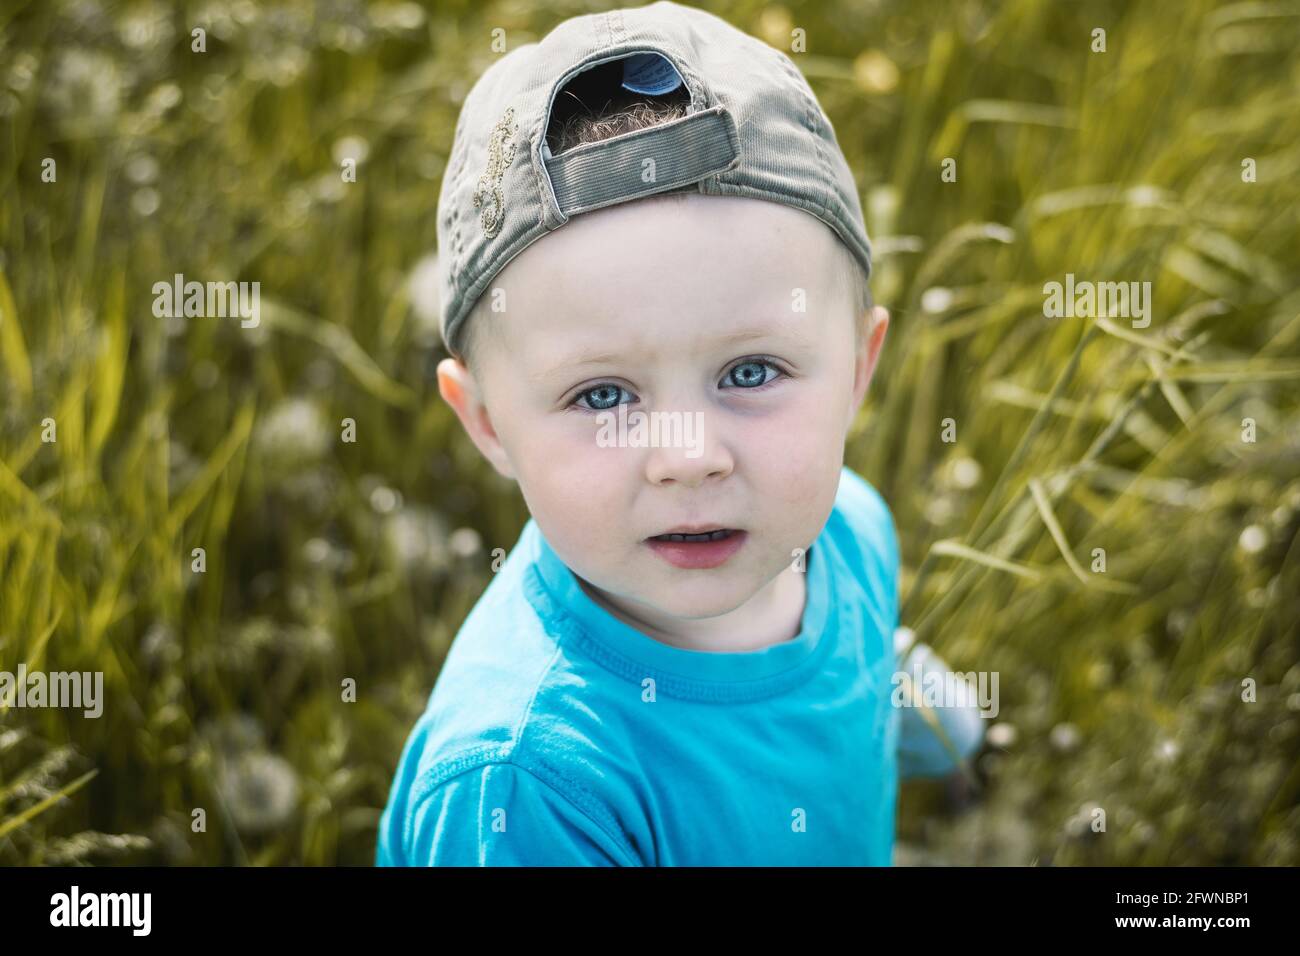 Two-year-old Caucasian boy in baseball cap and blue t-shirt looks up to Camera. In the background defocused grass with damped colors. Stock Photo